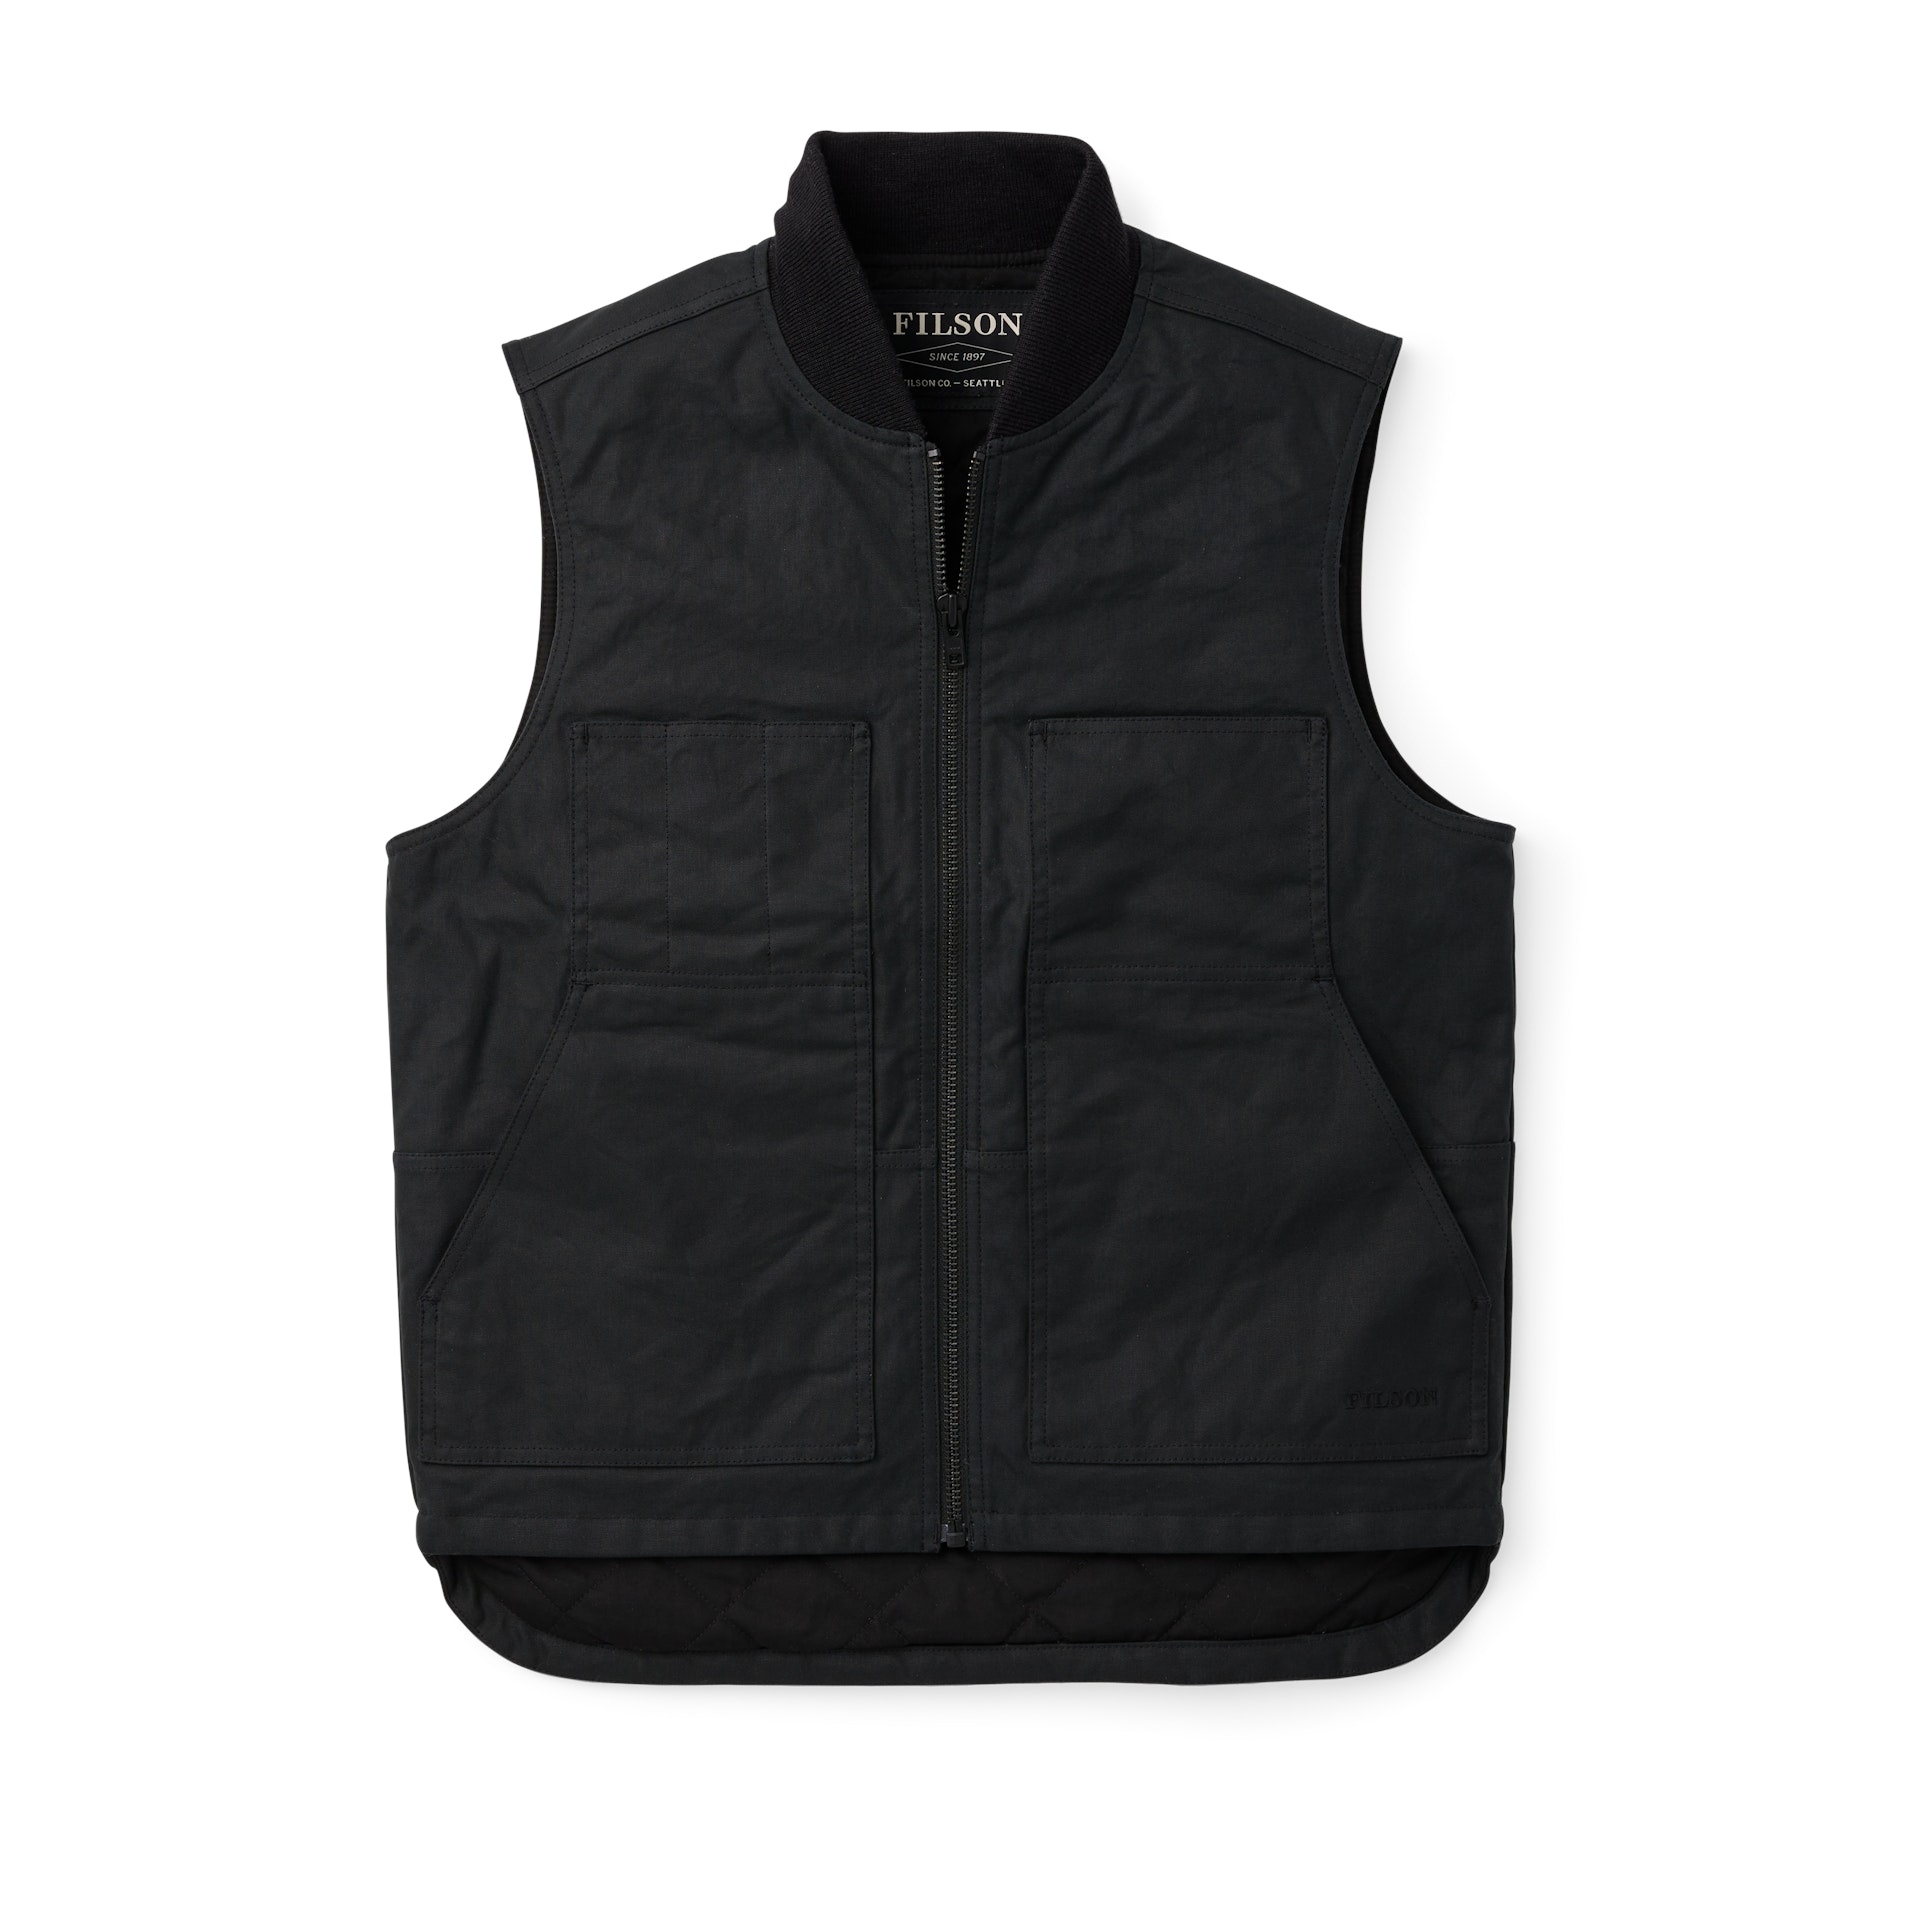 Waxed Canvas Insulated Work Vest